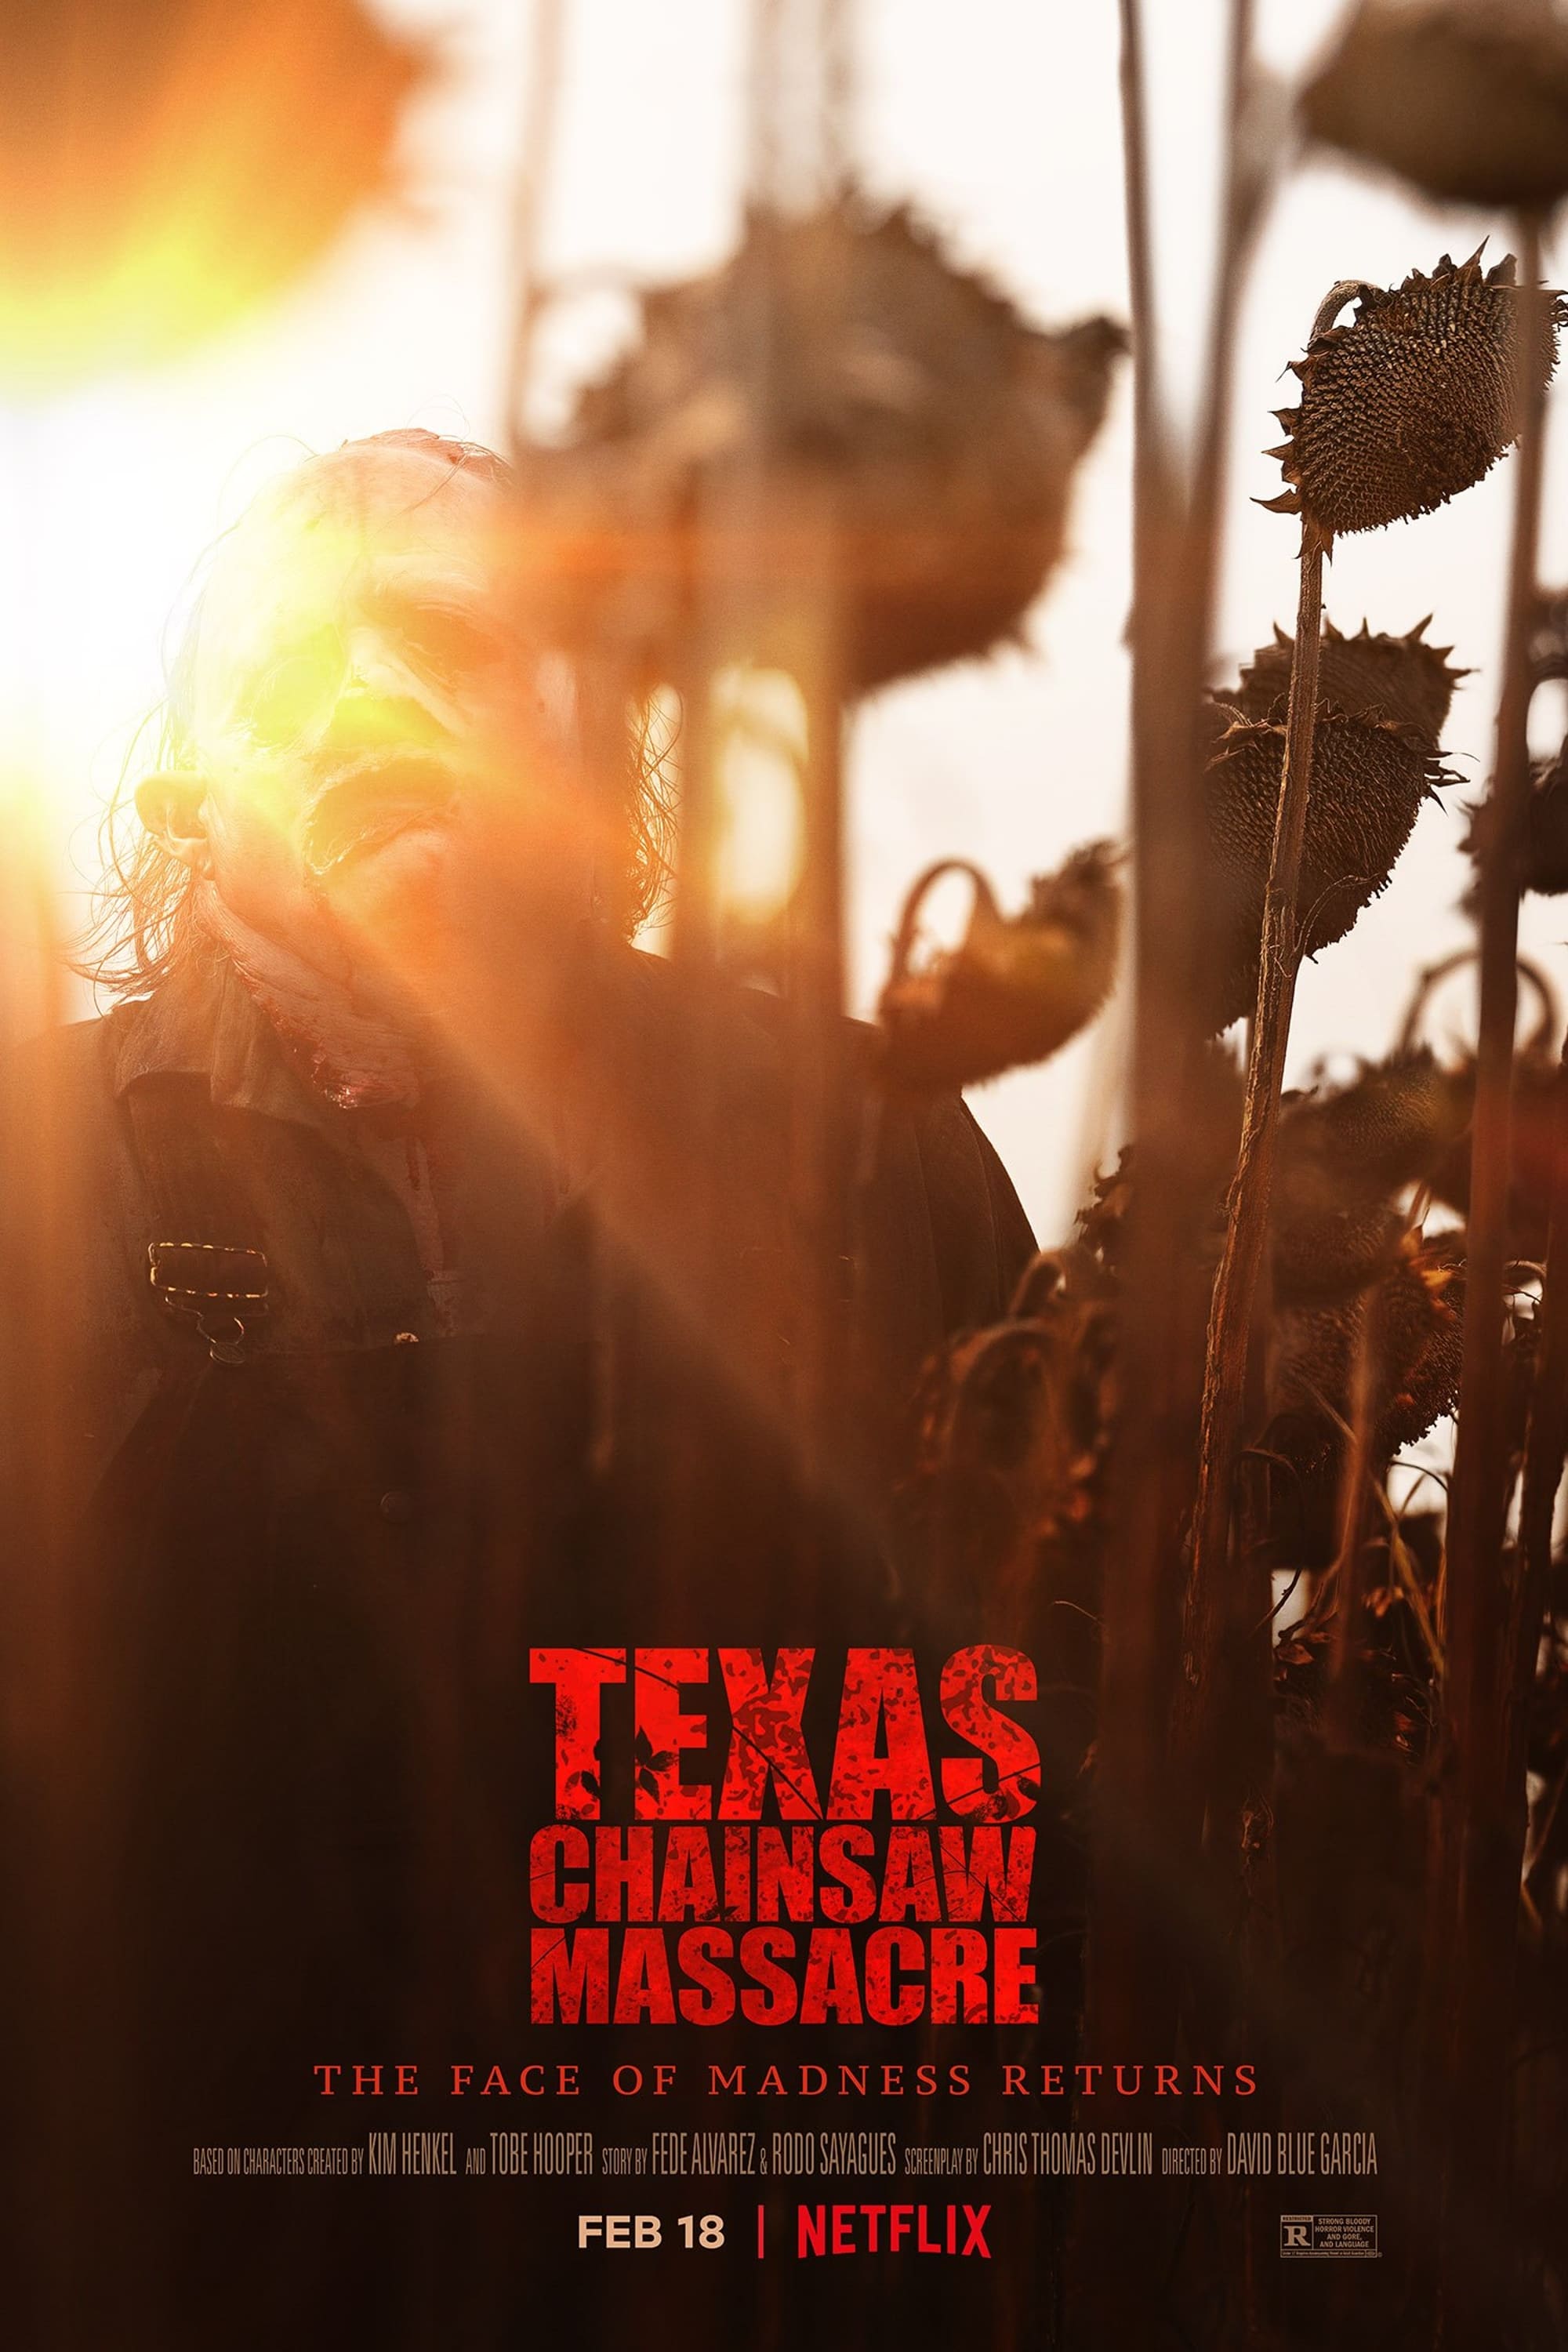 david maino recommends the texas chainsaw massacre free pic